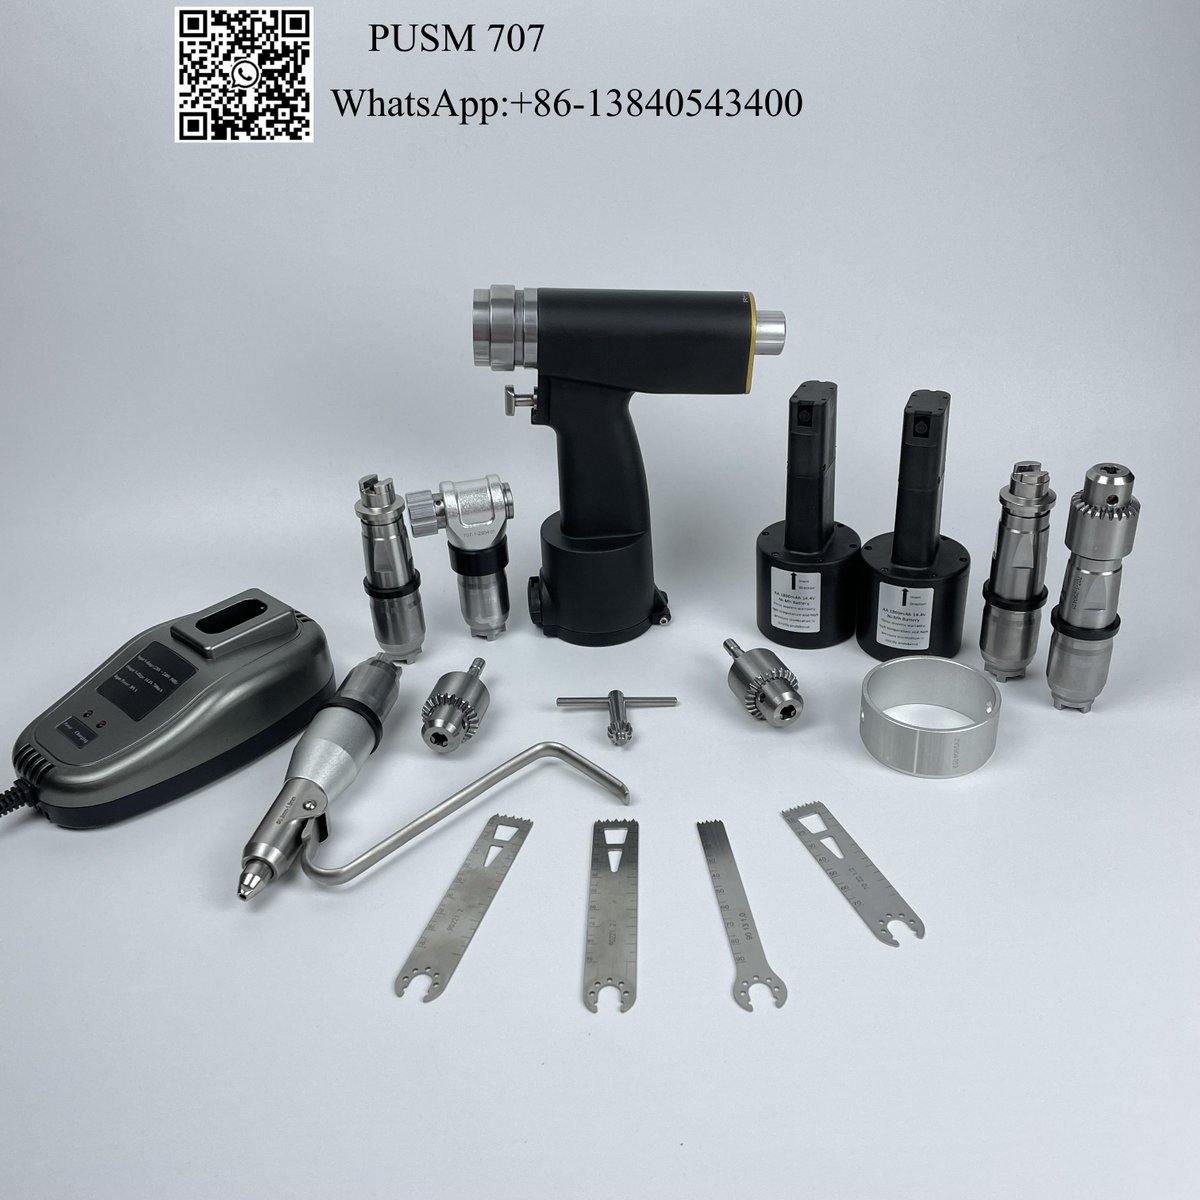 PUSM 707, multi-functional power tool/ ready for shipment/ welcome your inquiry/ wa.me +86-13840543400  #hipreplacement #Jointsurgery #traumasurgery #orthopaedicsurgery #orthopaedicsurgeon #orthopedicdoctor #Bonesaw #Bonedrill